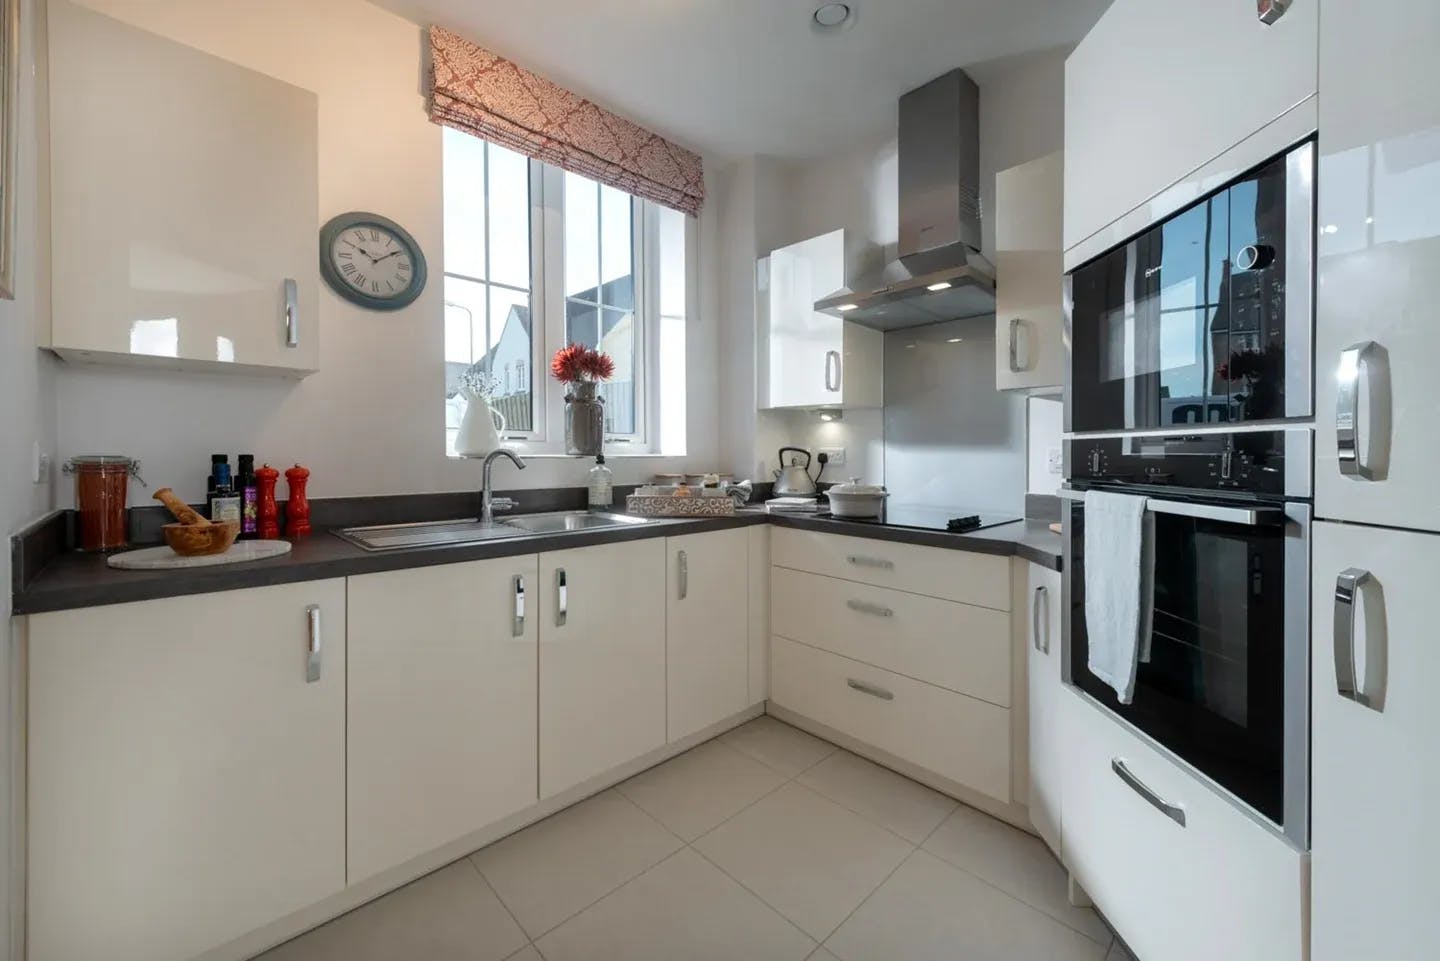 Kitchen at Watson Place Retirement Apartment in Chipping Norton, West Oxfordshire